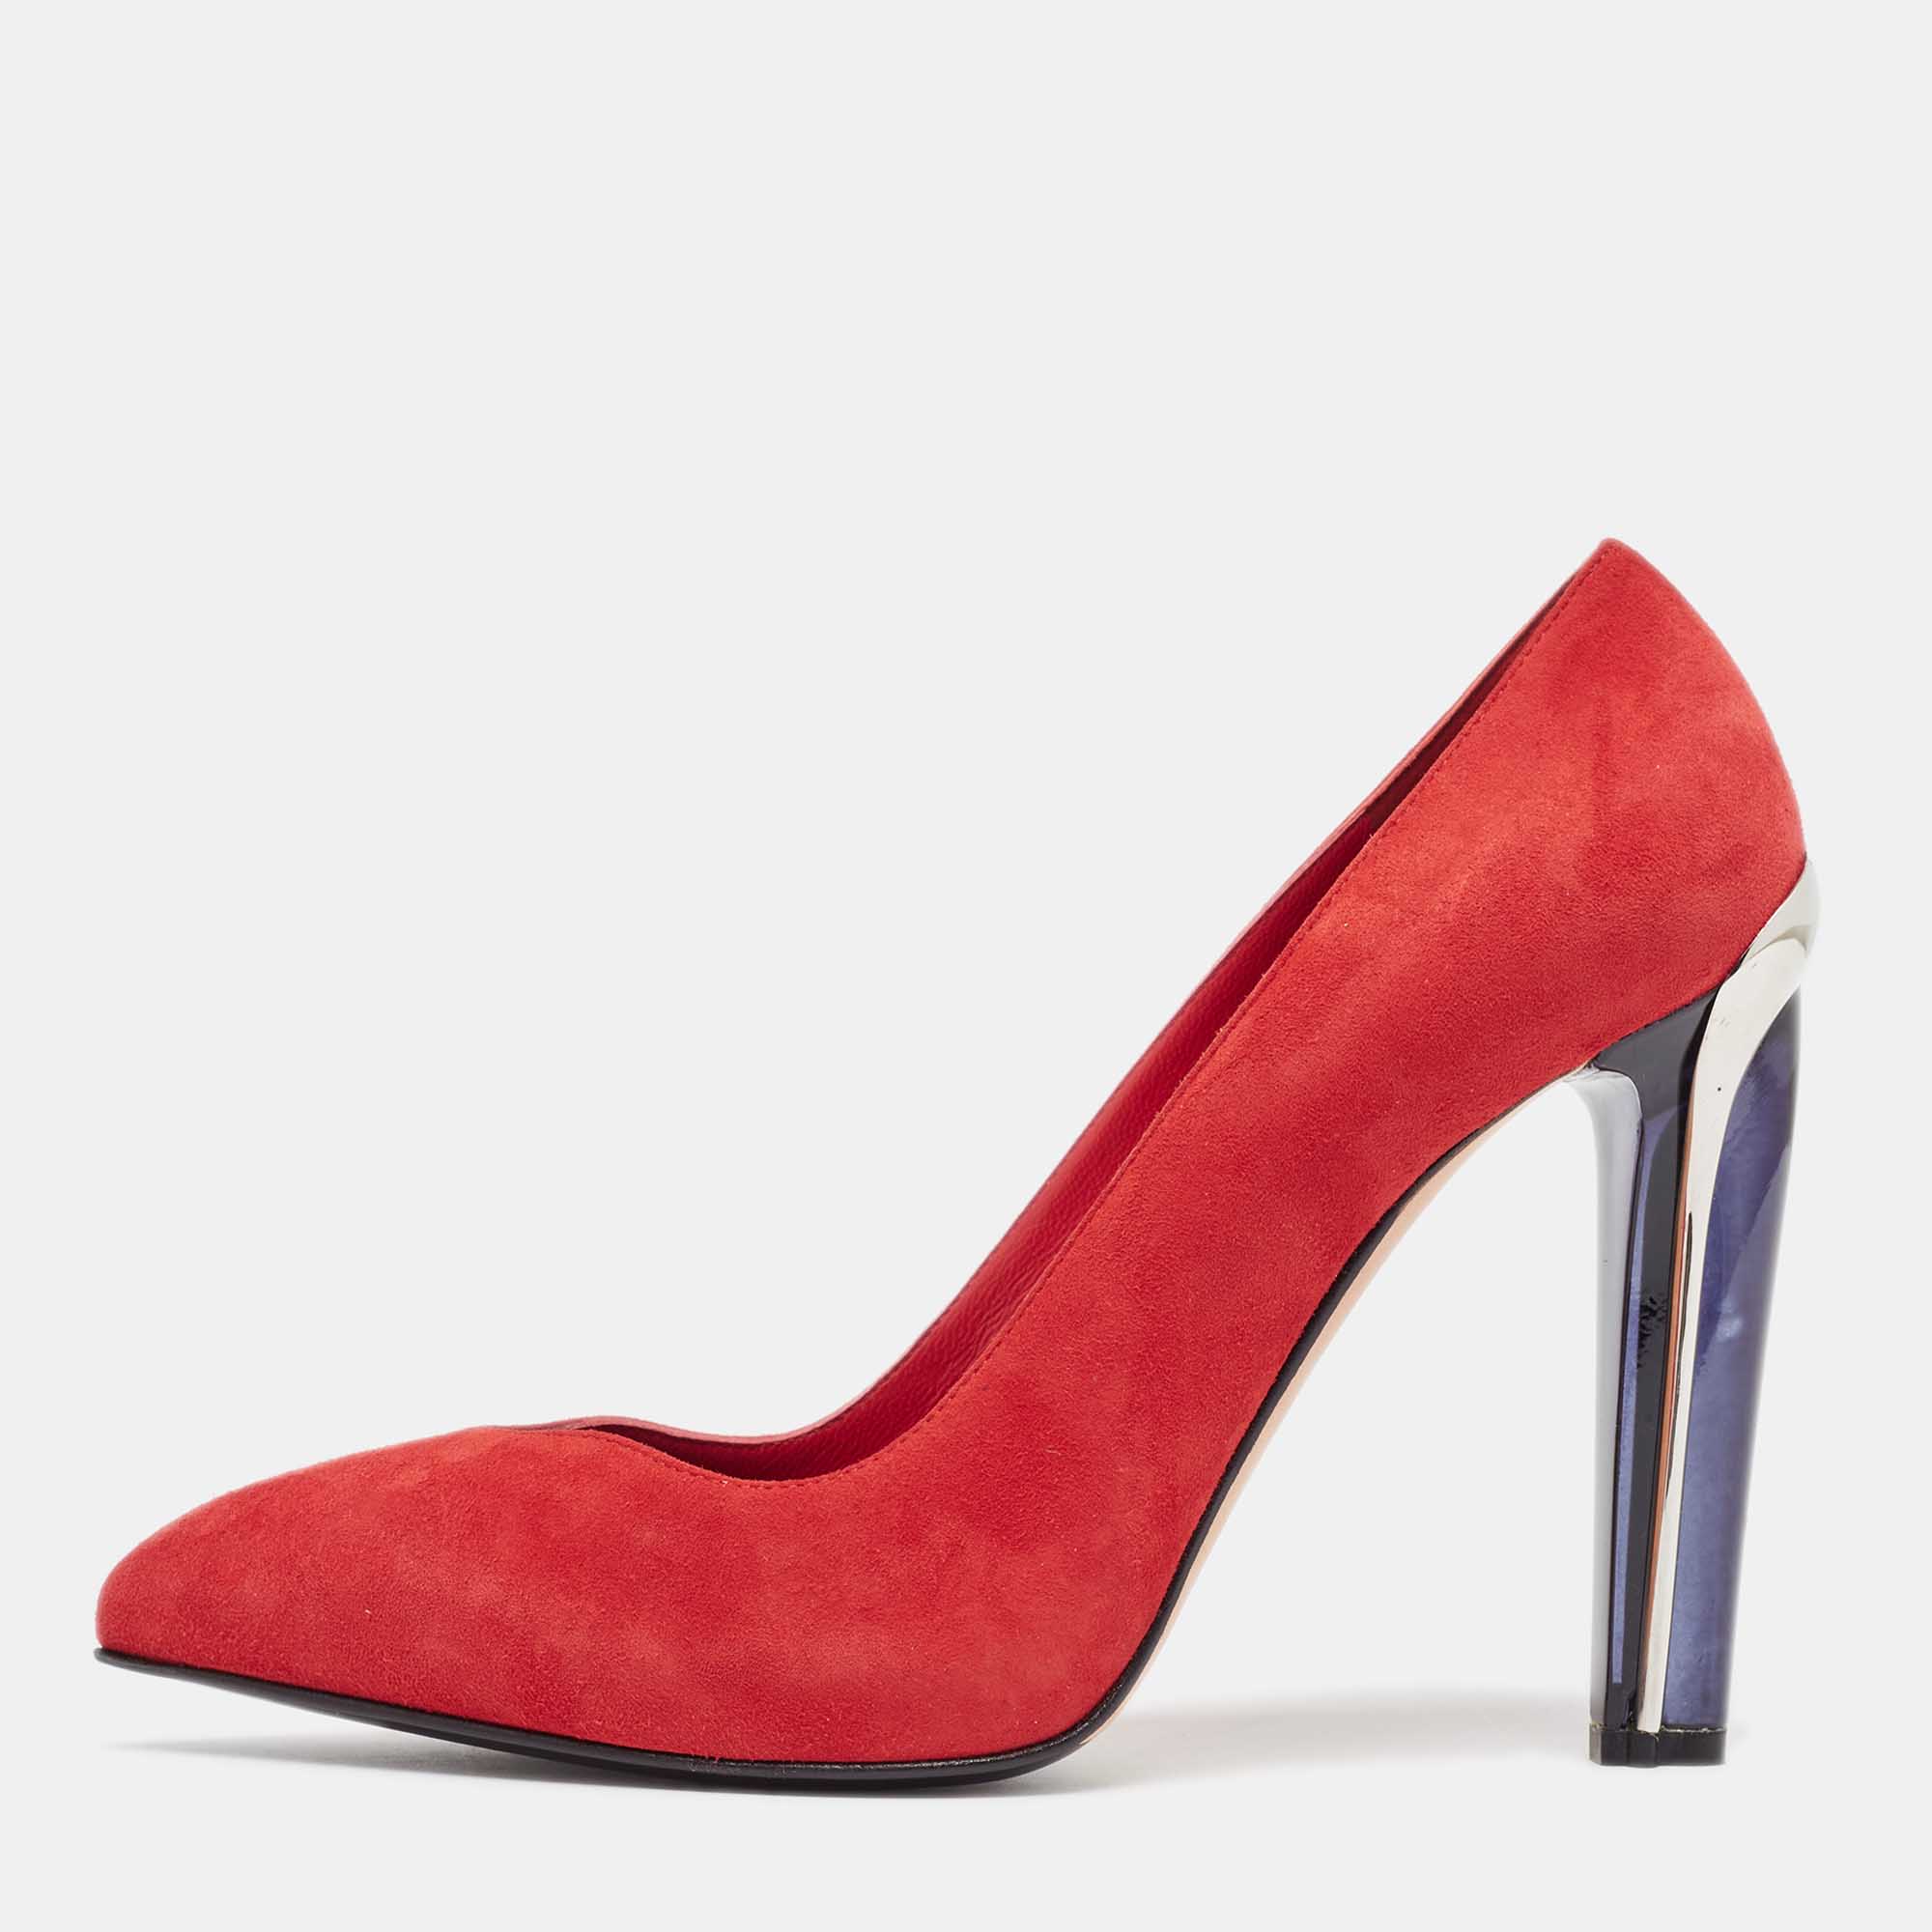 Alexander mcqueen red suede pointed toe pumps size 39